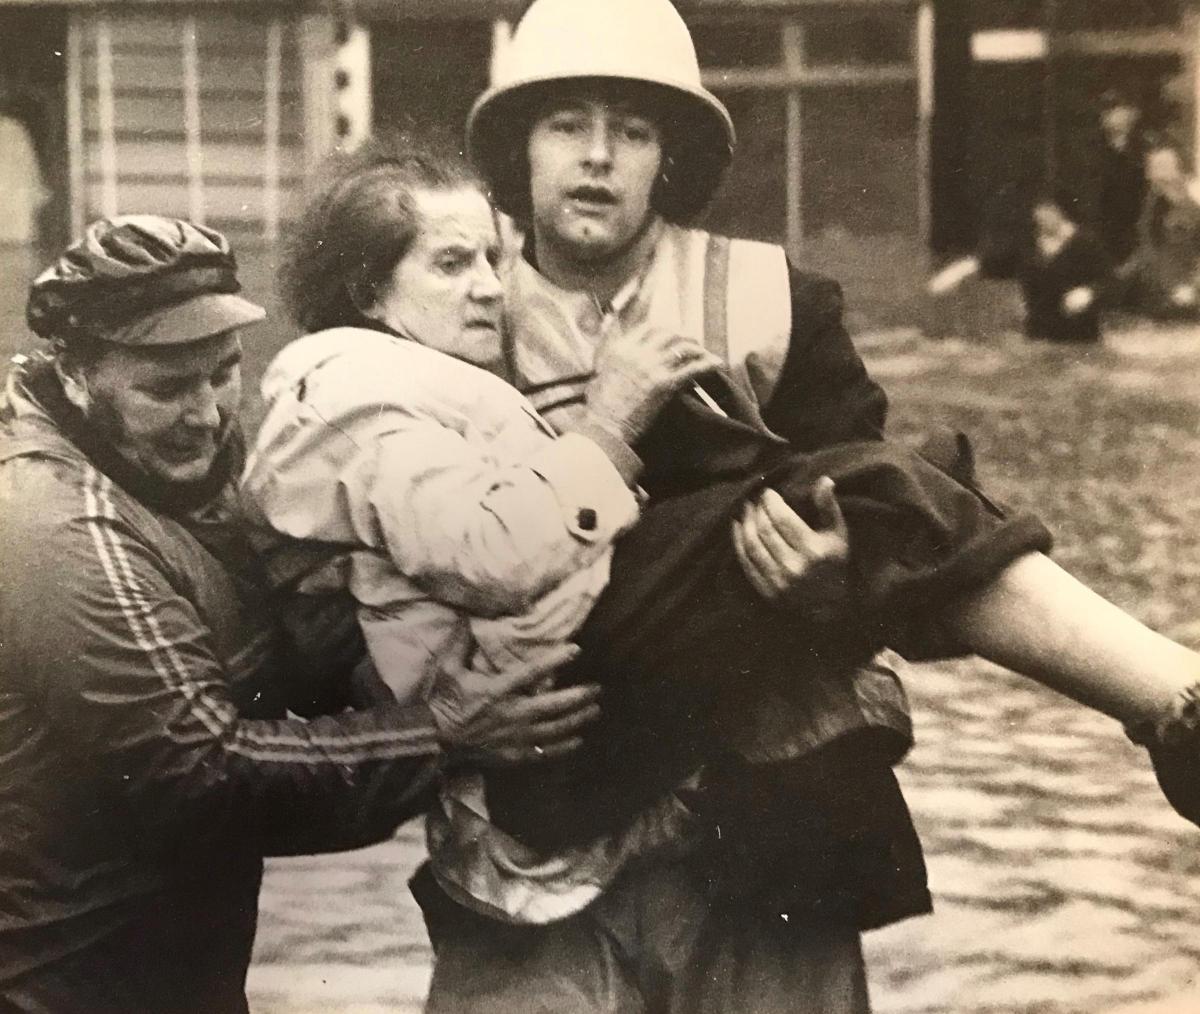 A fireman carries a pensioner to safety in Risca after heavy rain caused floods in 1979